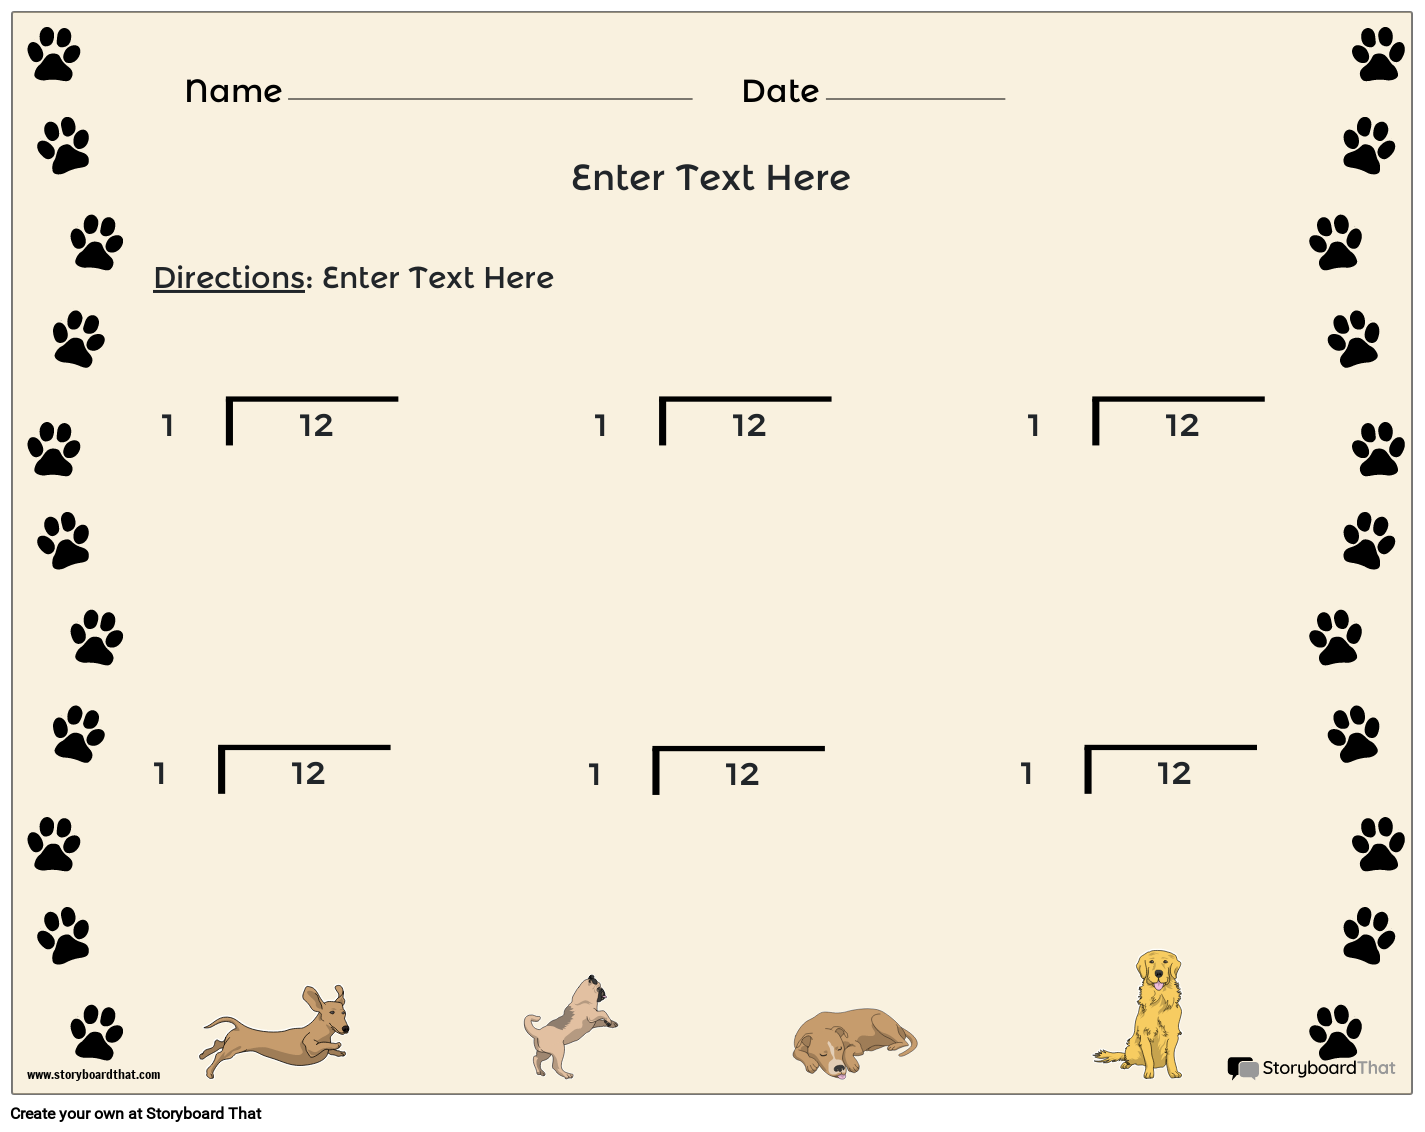 Dog-Themed Division Worksheet Template 